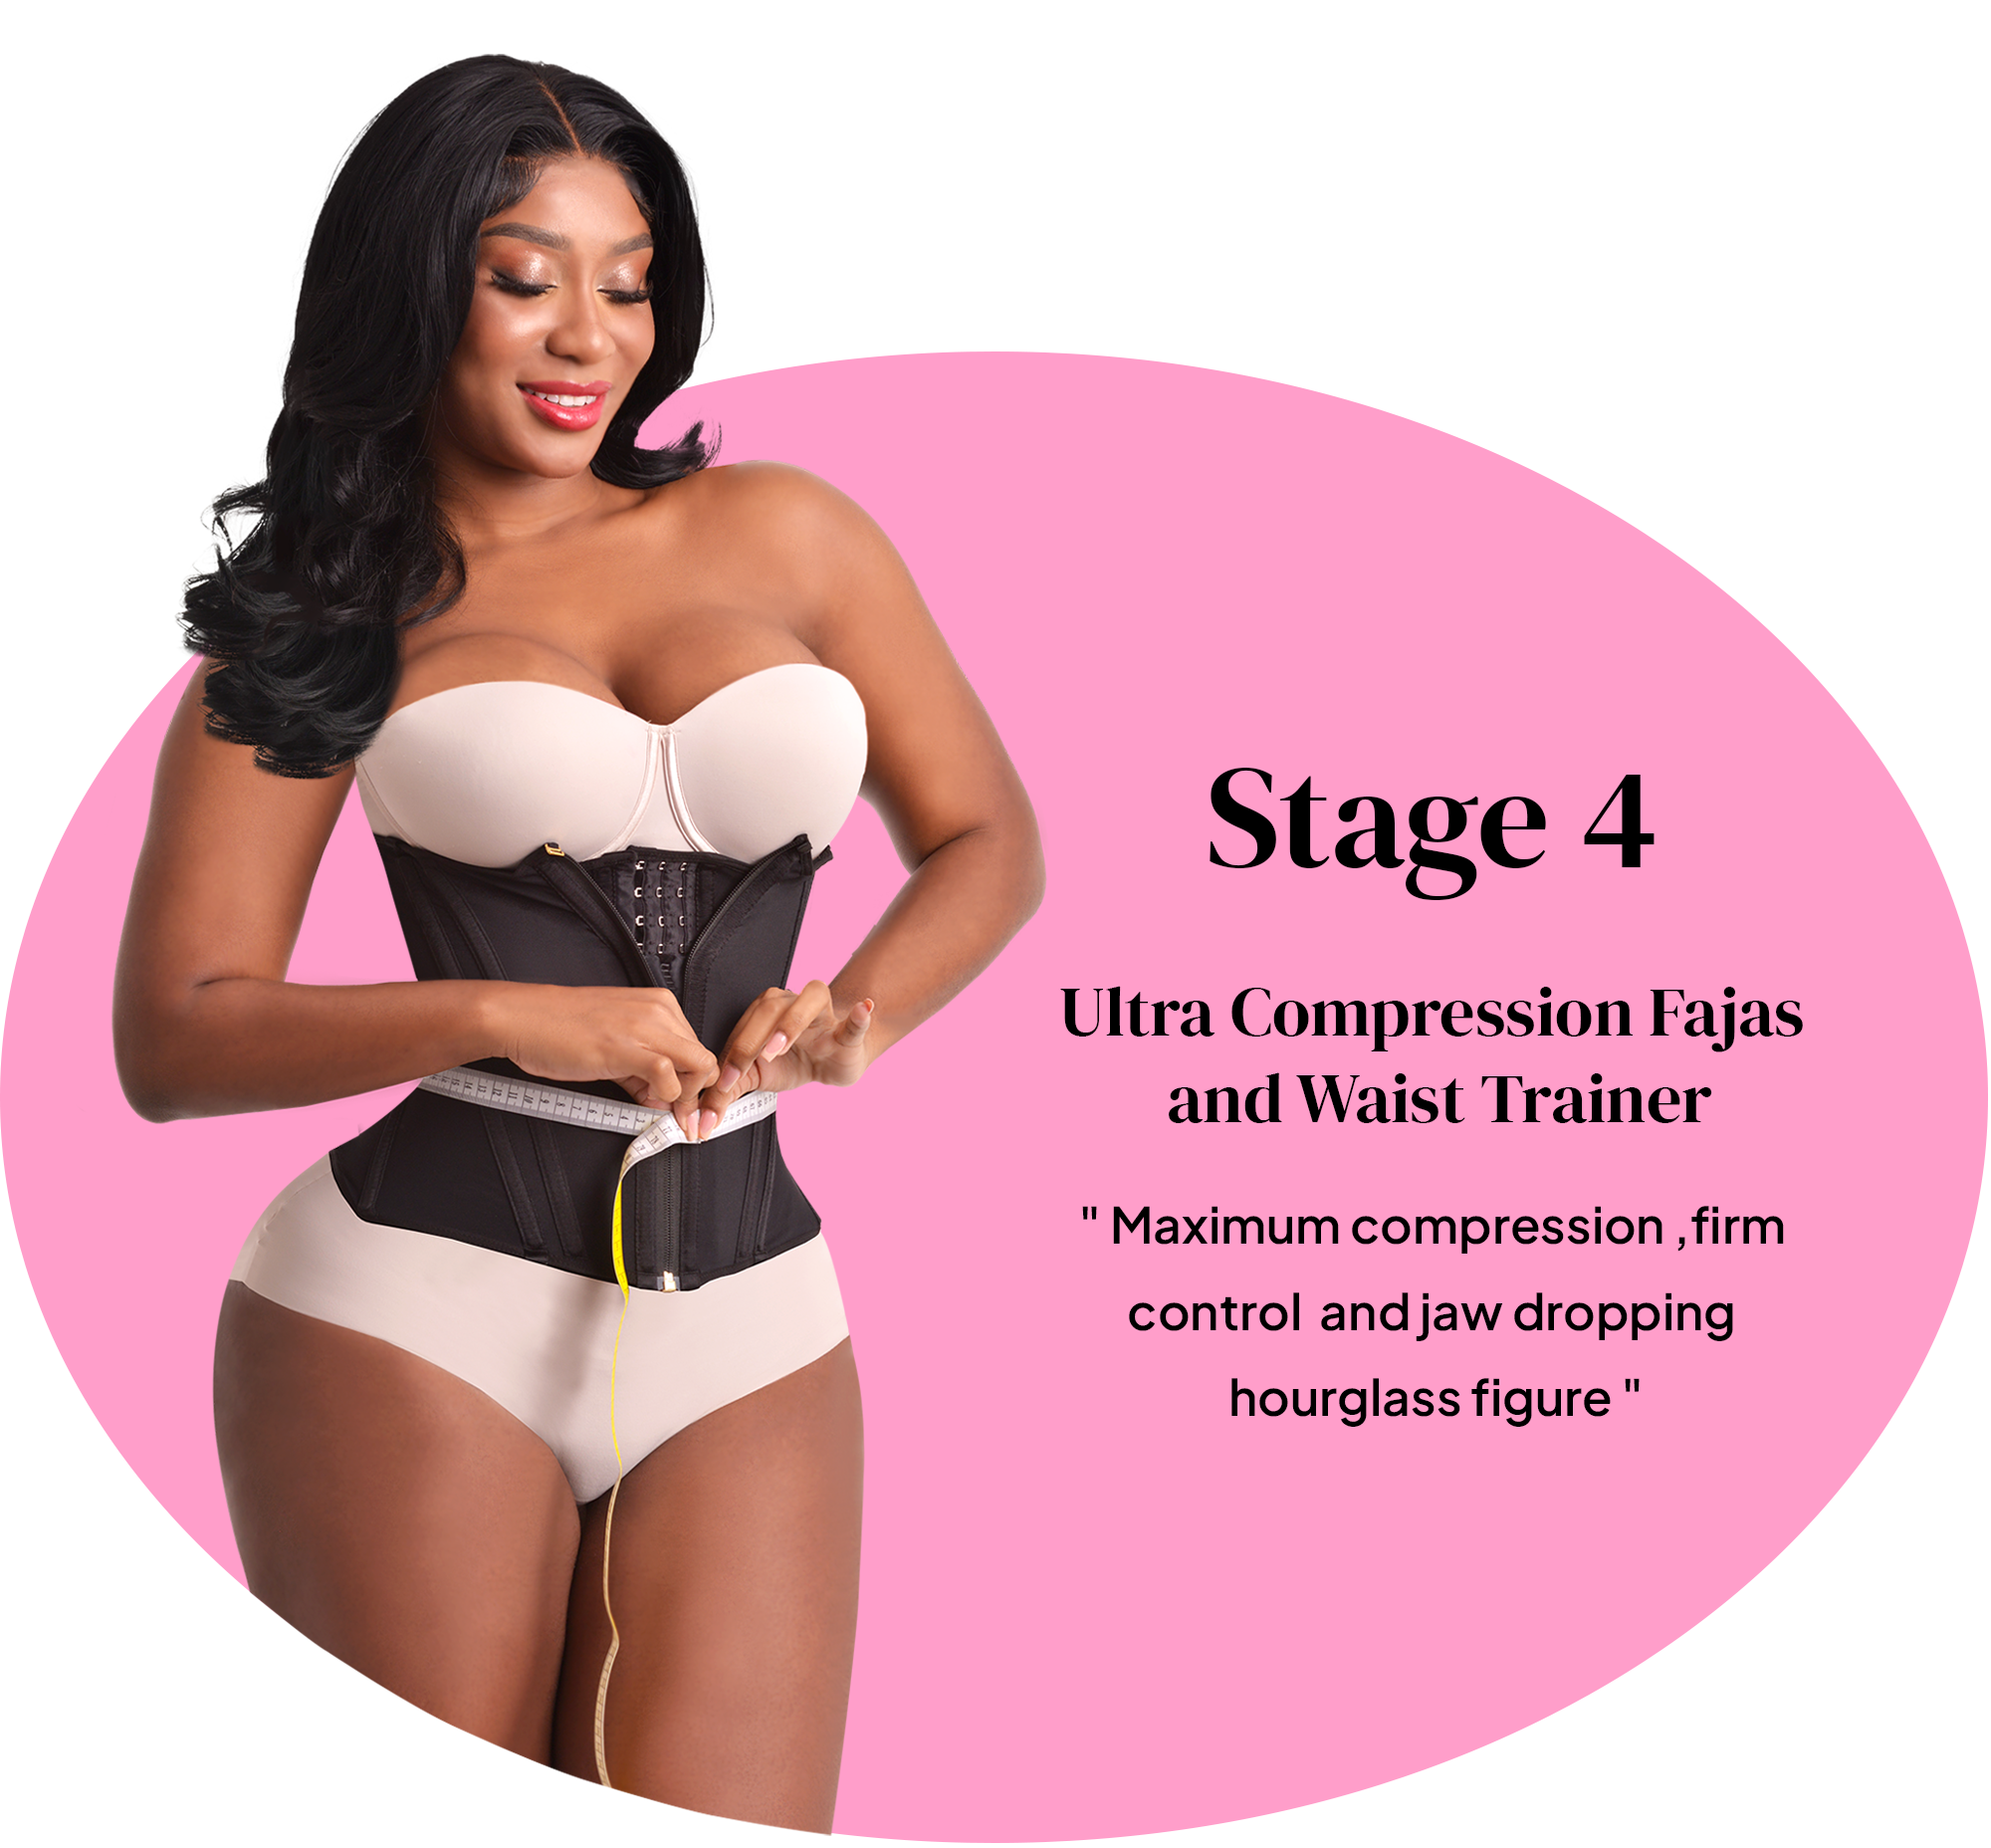 Latex Waist Trainer for Liposuction, Tummy Tuck and BBL